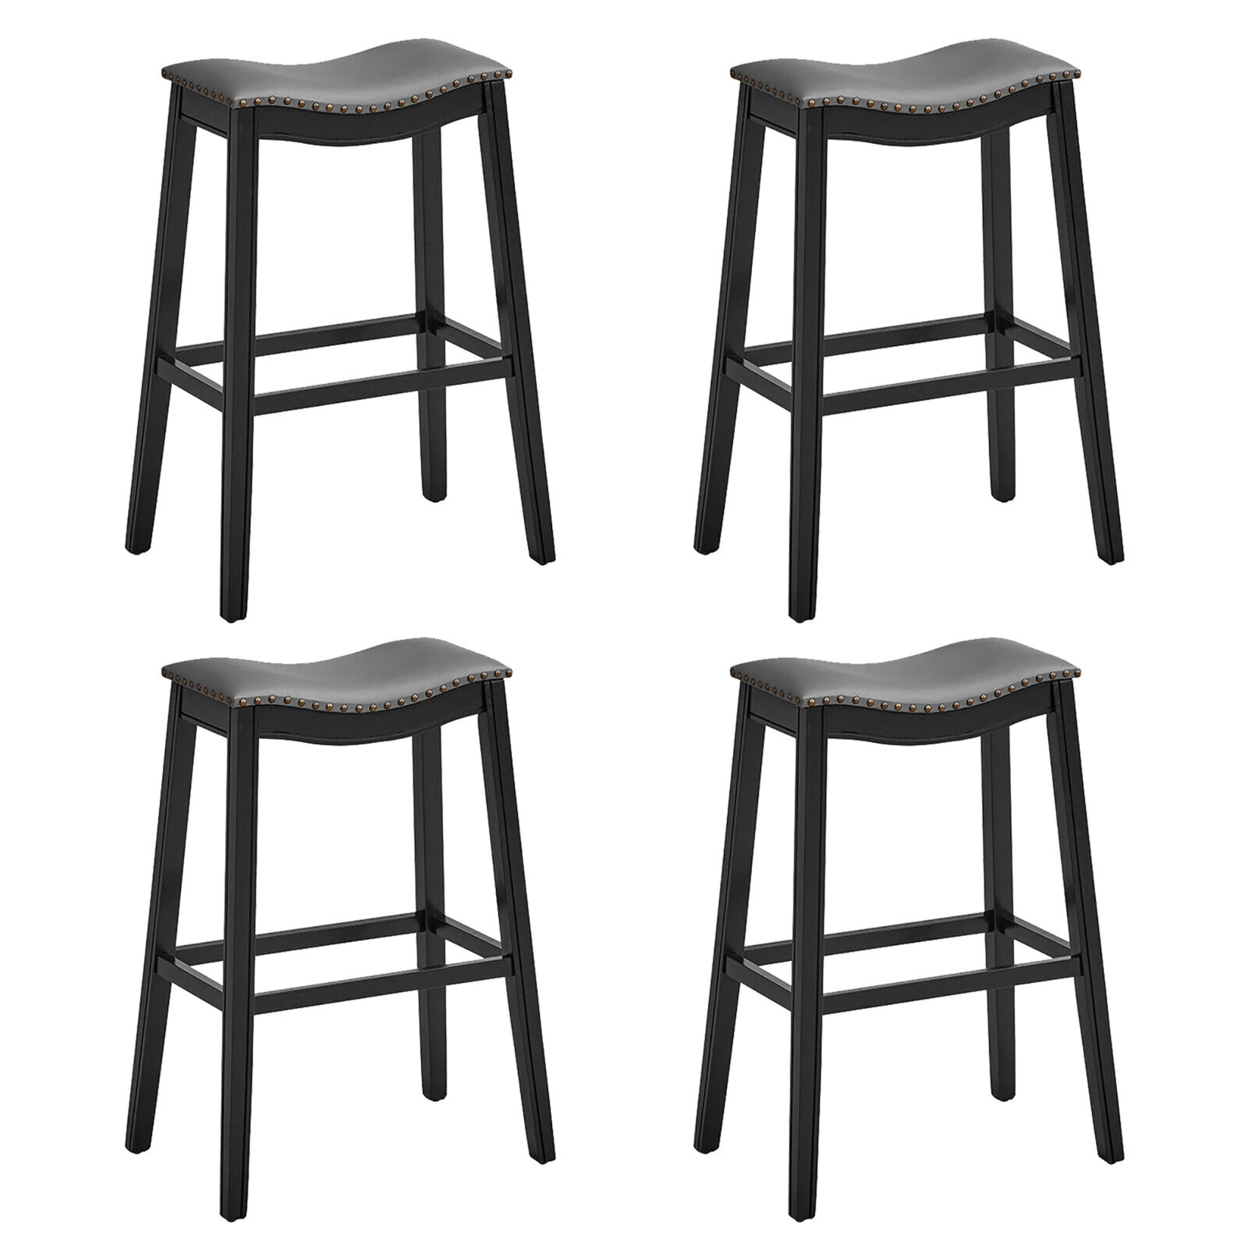 Set Of 4 Saddle Bar Stools Bar Height Kitchen Chairs W/ Rubber Wood Legs - Black